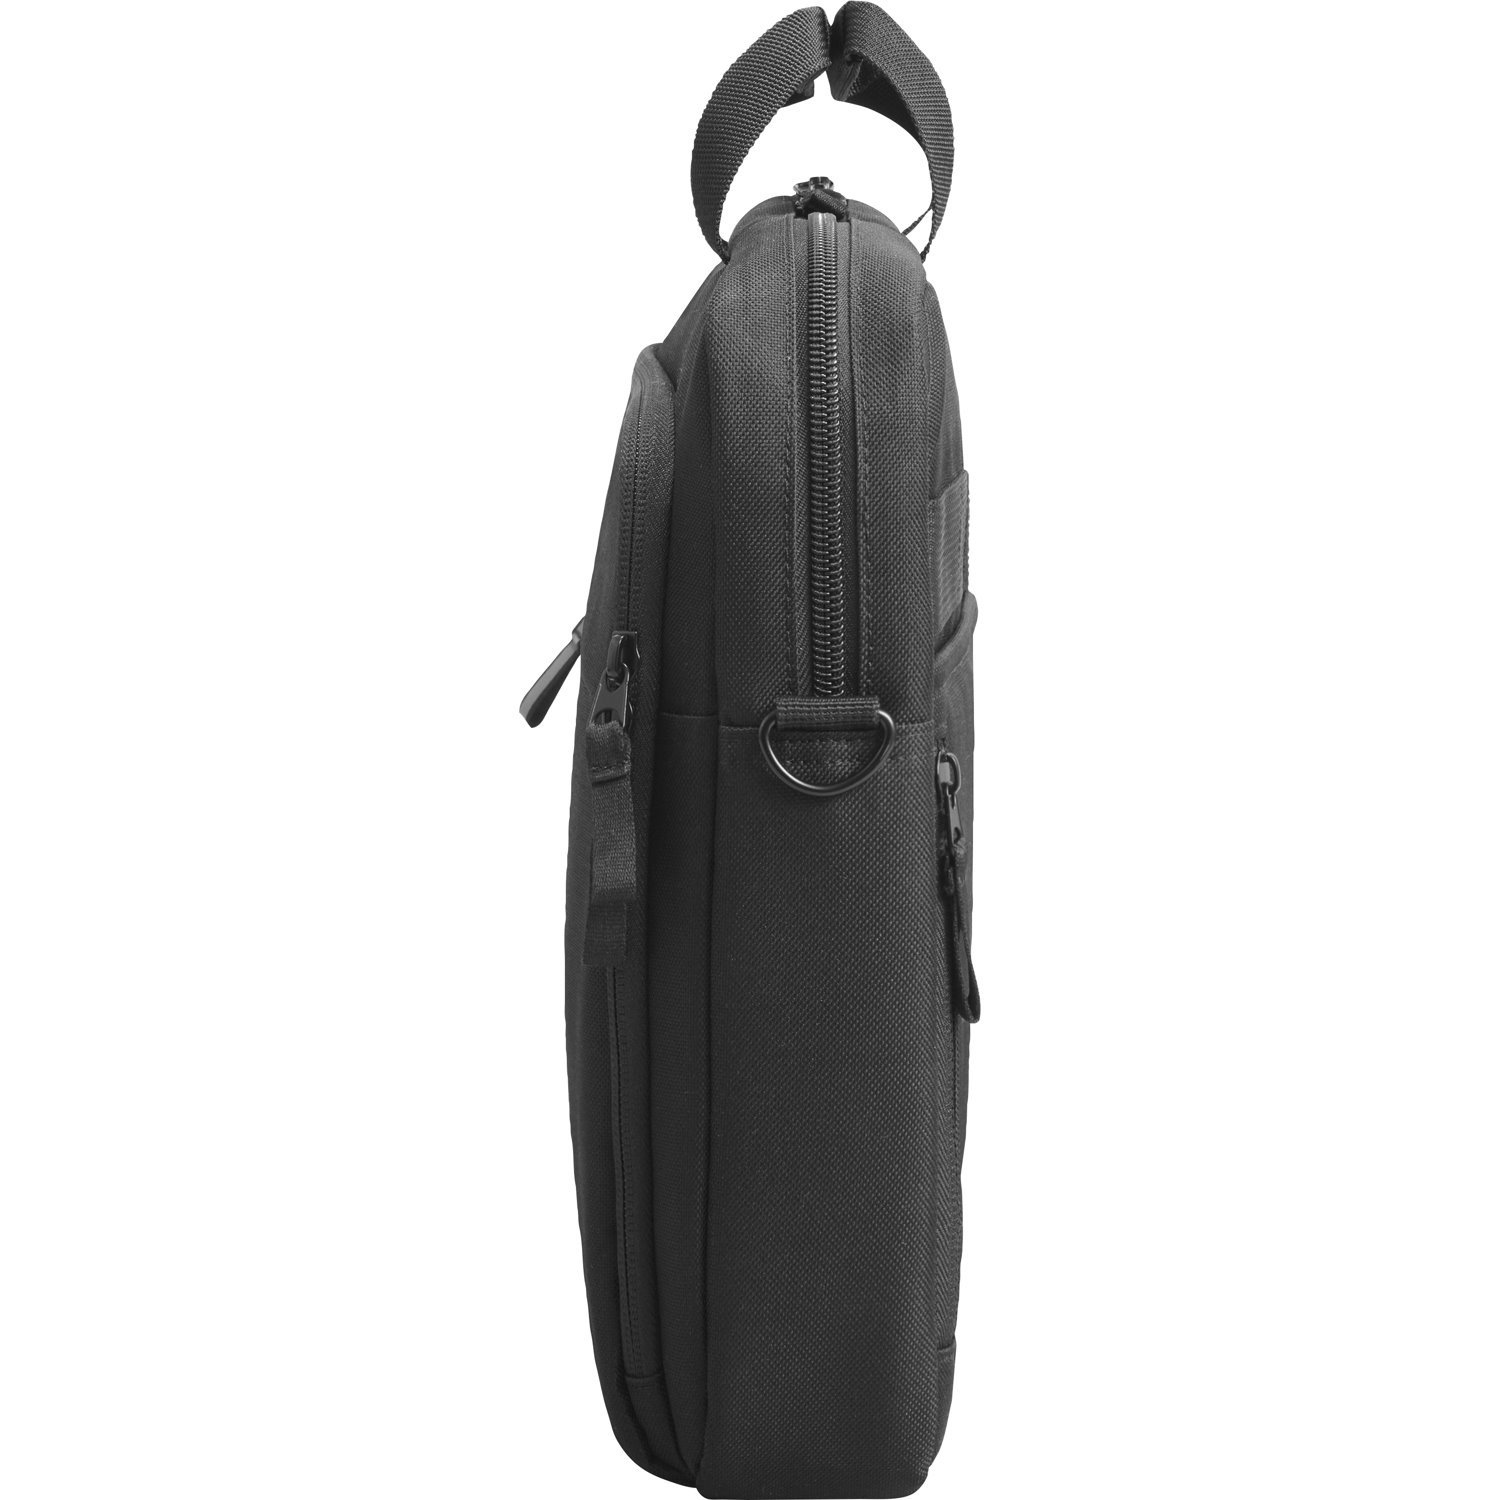 HP Renew Carrying Case (Messenger) for 15.6" HP Notebook - Black